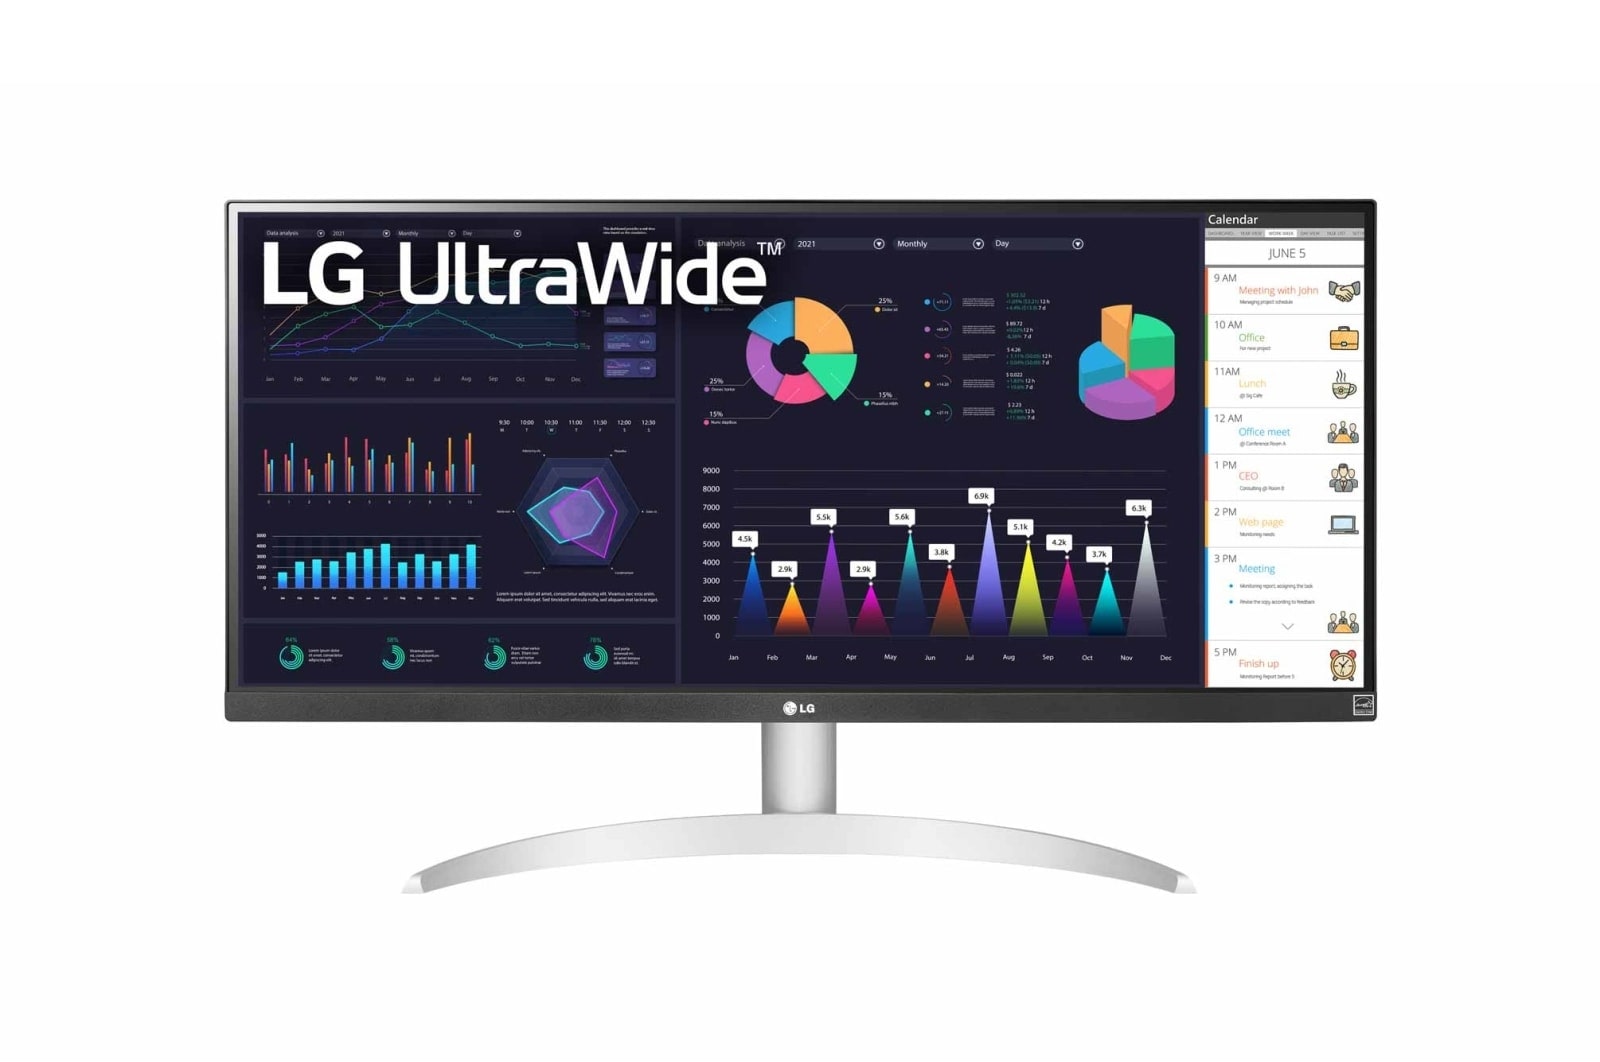 LG 27UK850-W Monitor Review: A High-Res Professional Monitor